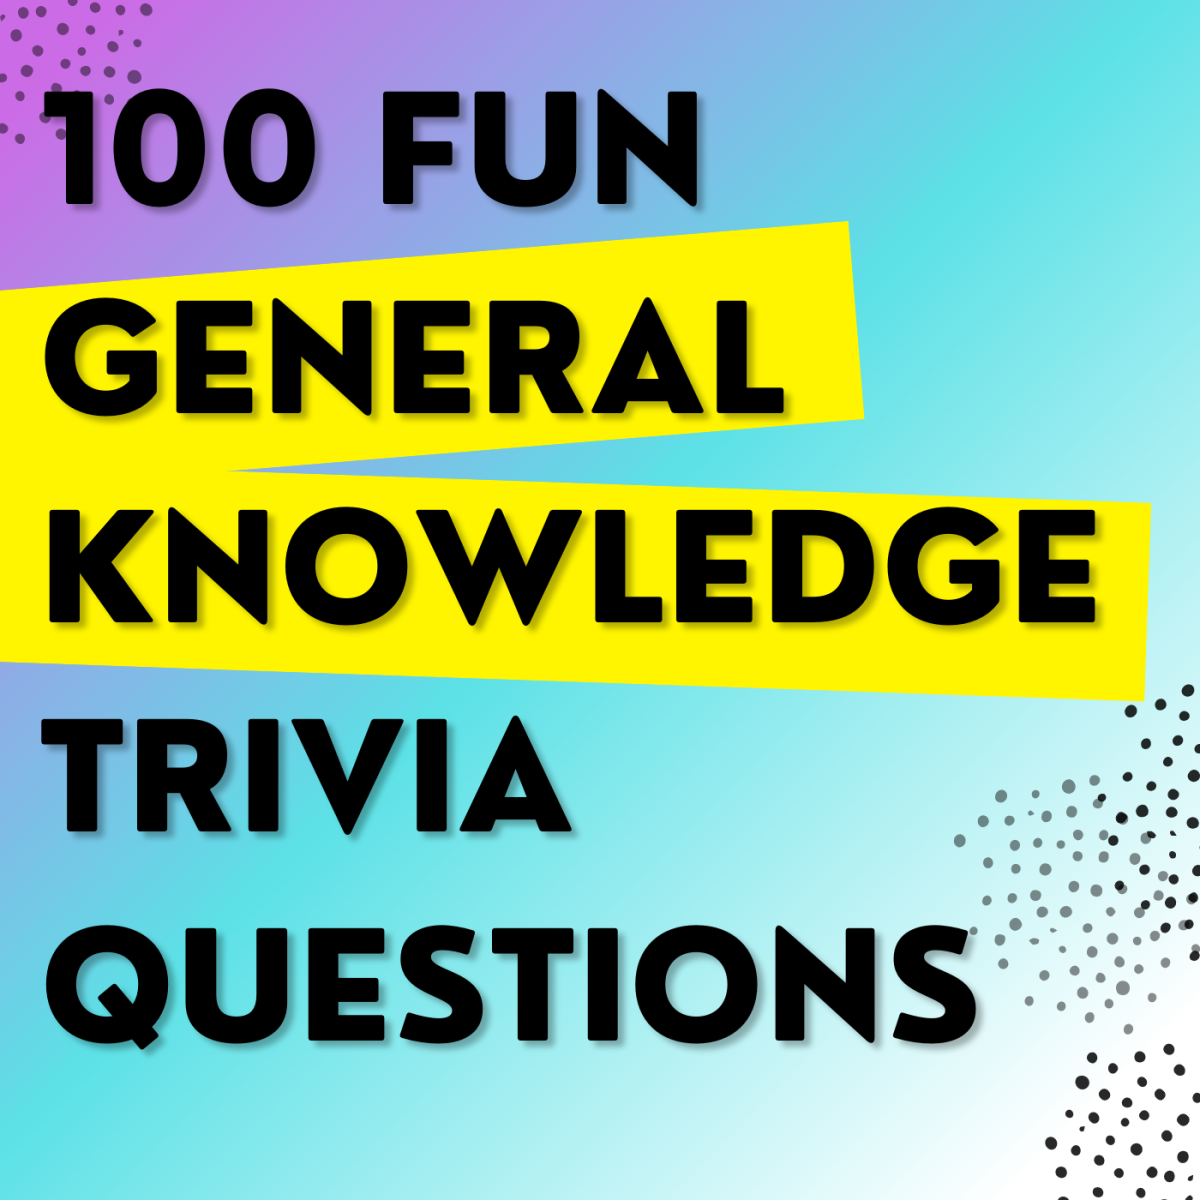 These fun, general knowledge quizzes are suitable for a wide variety of groups and settings.